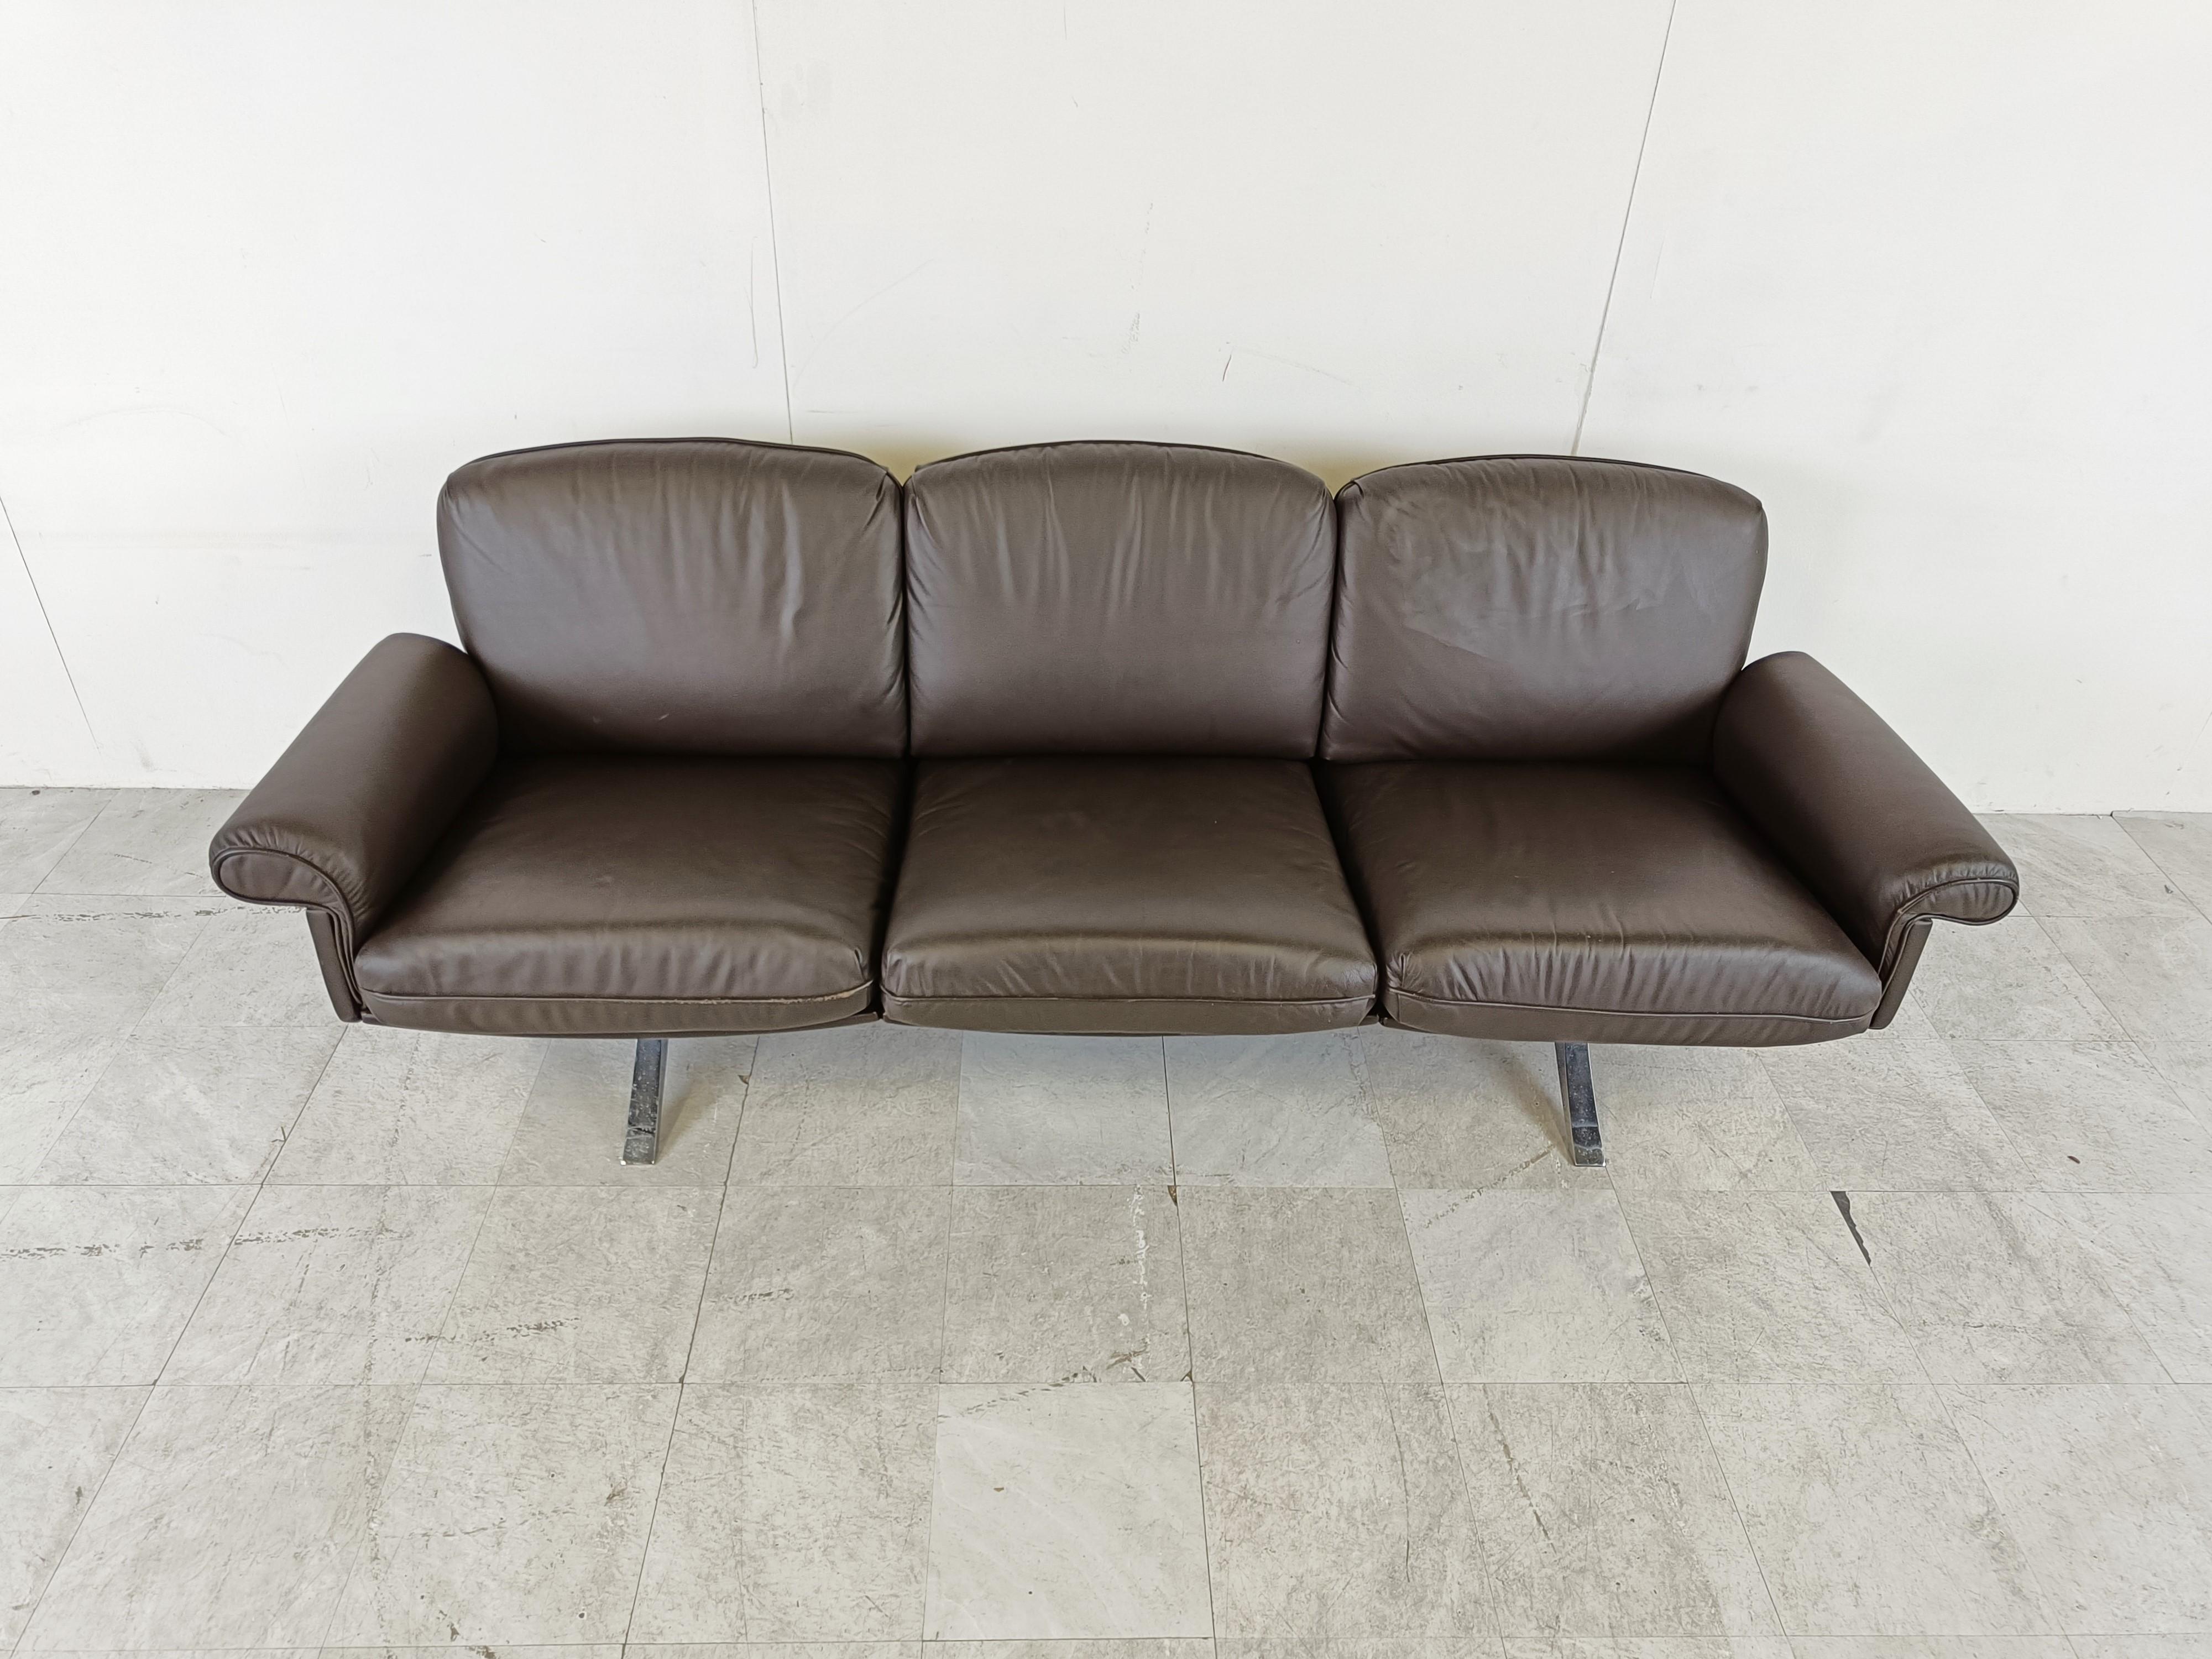 Beautiful dark brown leather sofa model DS31 designed and produced by De Sede.

One of our personal favorites from De Sede.

Well designed polished aluminum legs.

The sofa has been reupholstered in dark brown leather. 

Good condition,